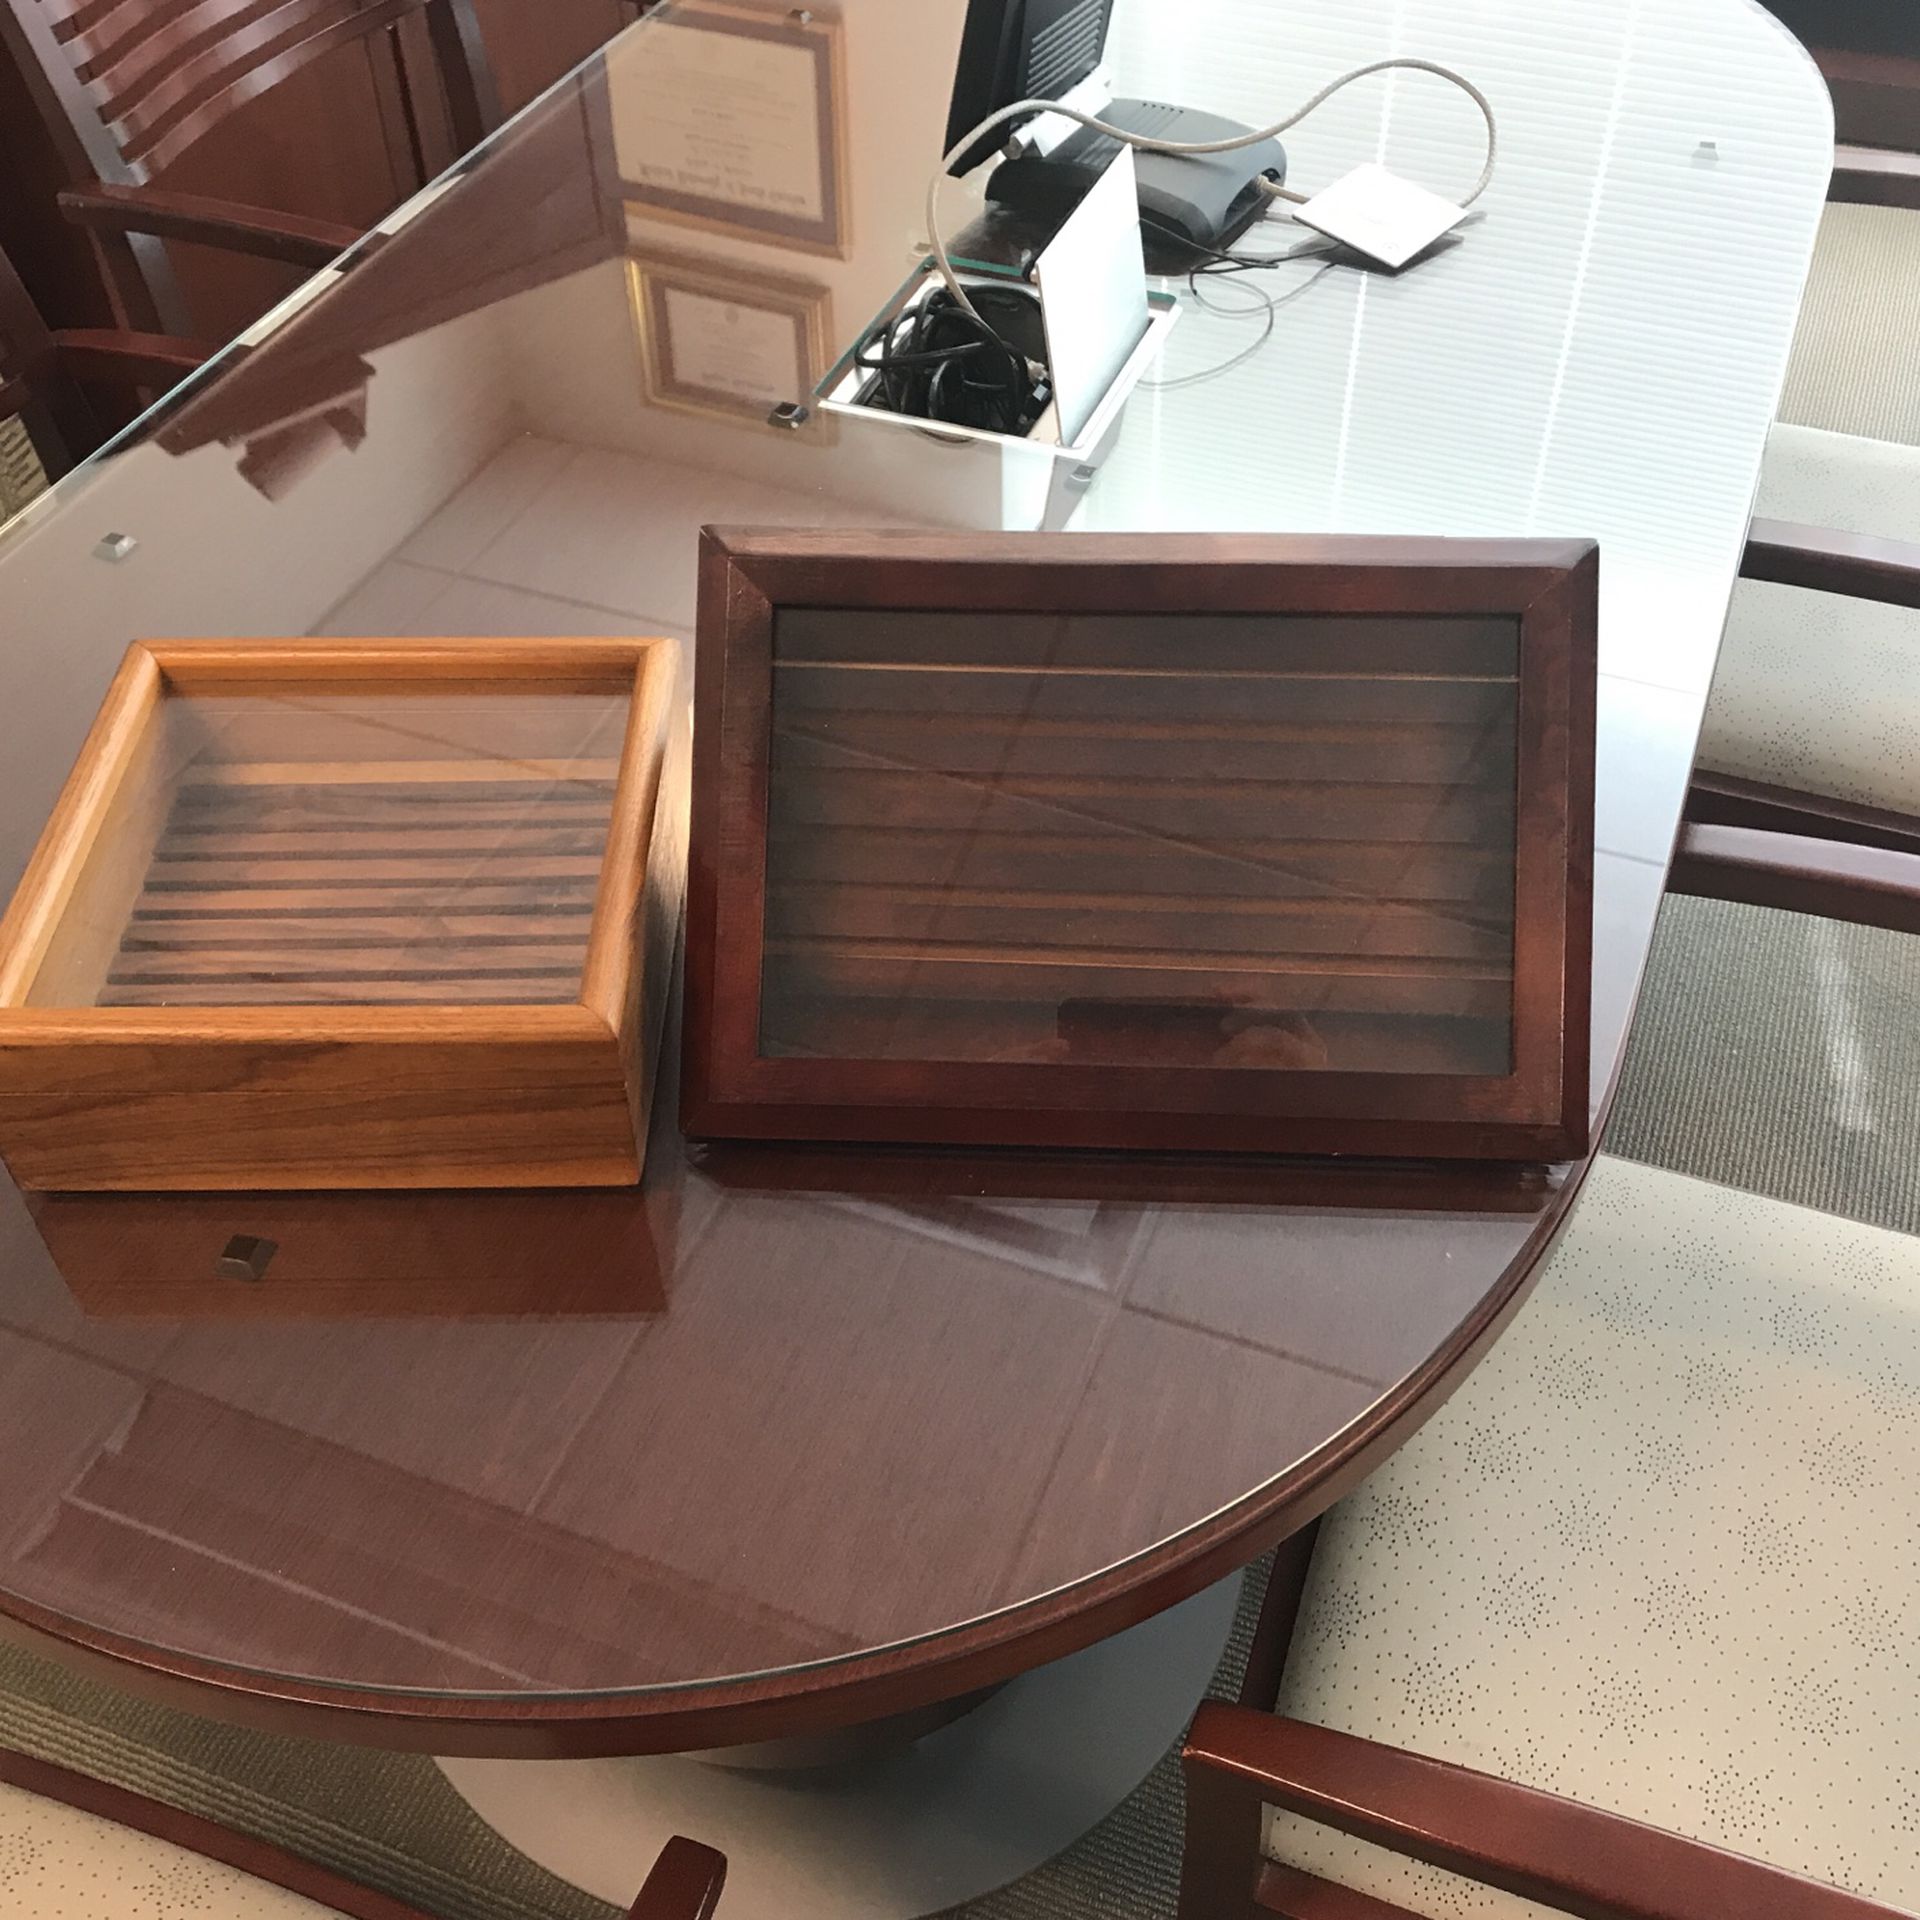 Two wooden coin boxes with glass covers